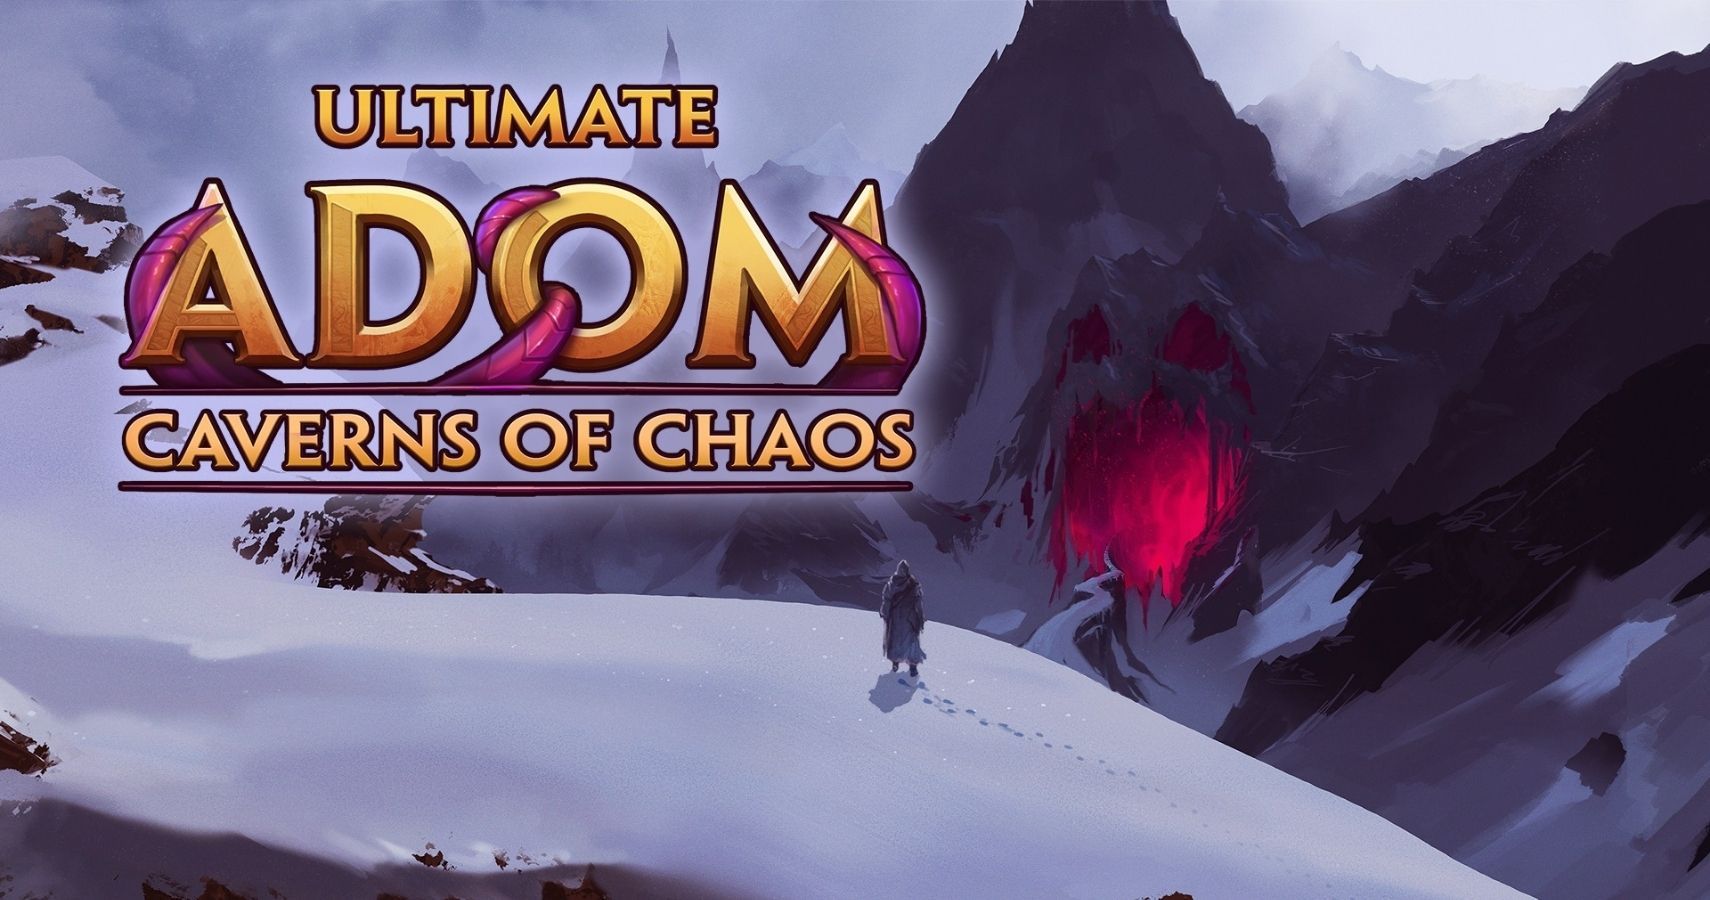 Ultimate Adom Caverns of Chaos Announcement feature image